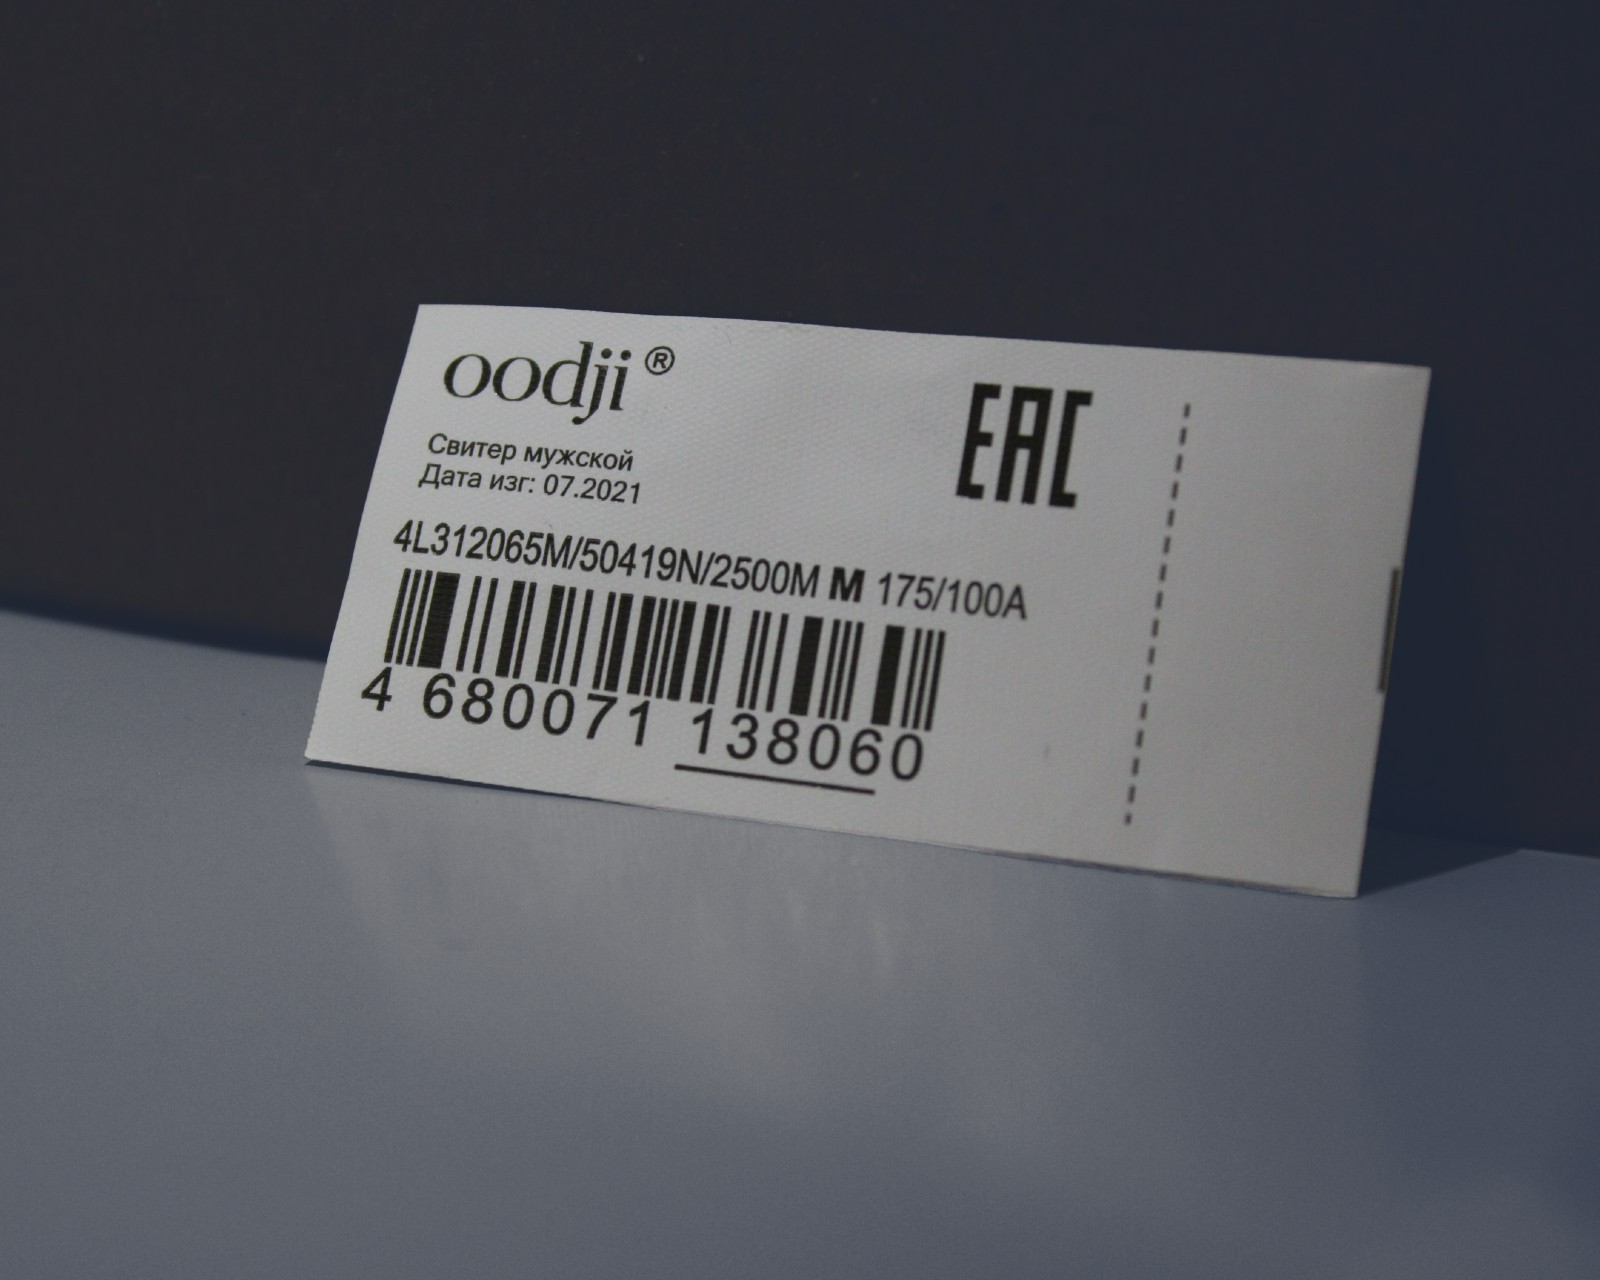 productBarcode Label